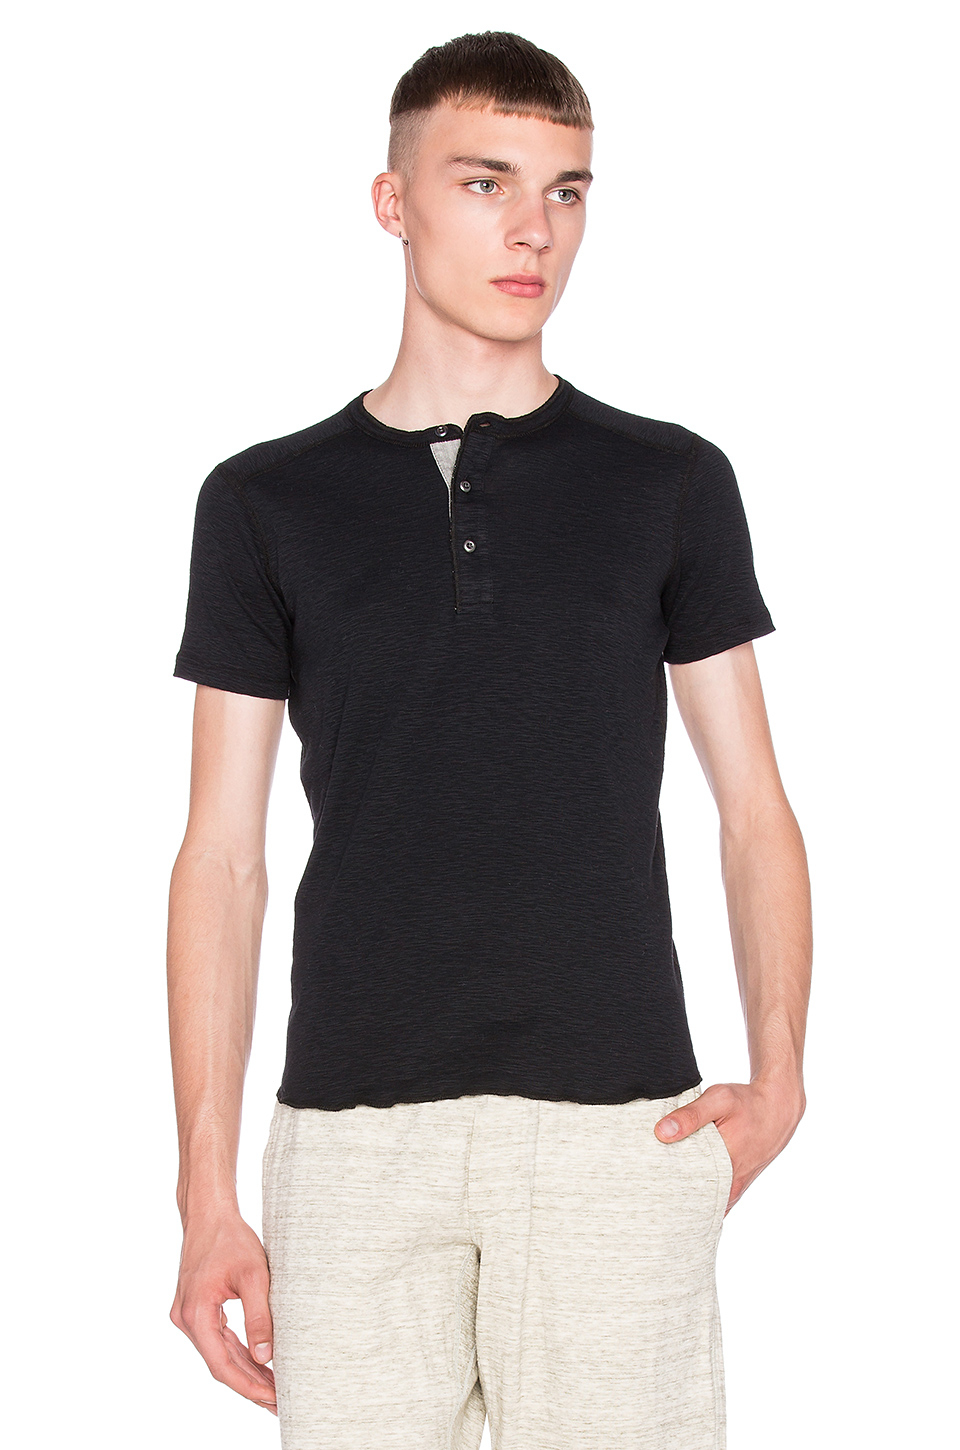 Wings + horns Fitted Cotton Henley Shirt in Black for Men | Lyst